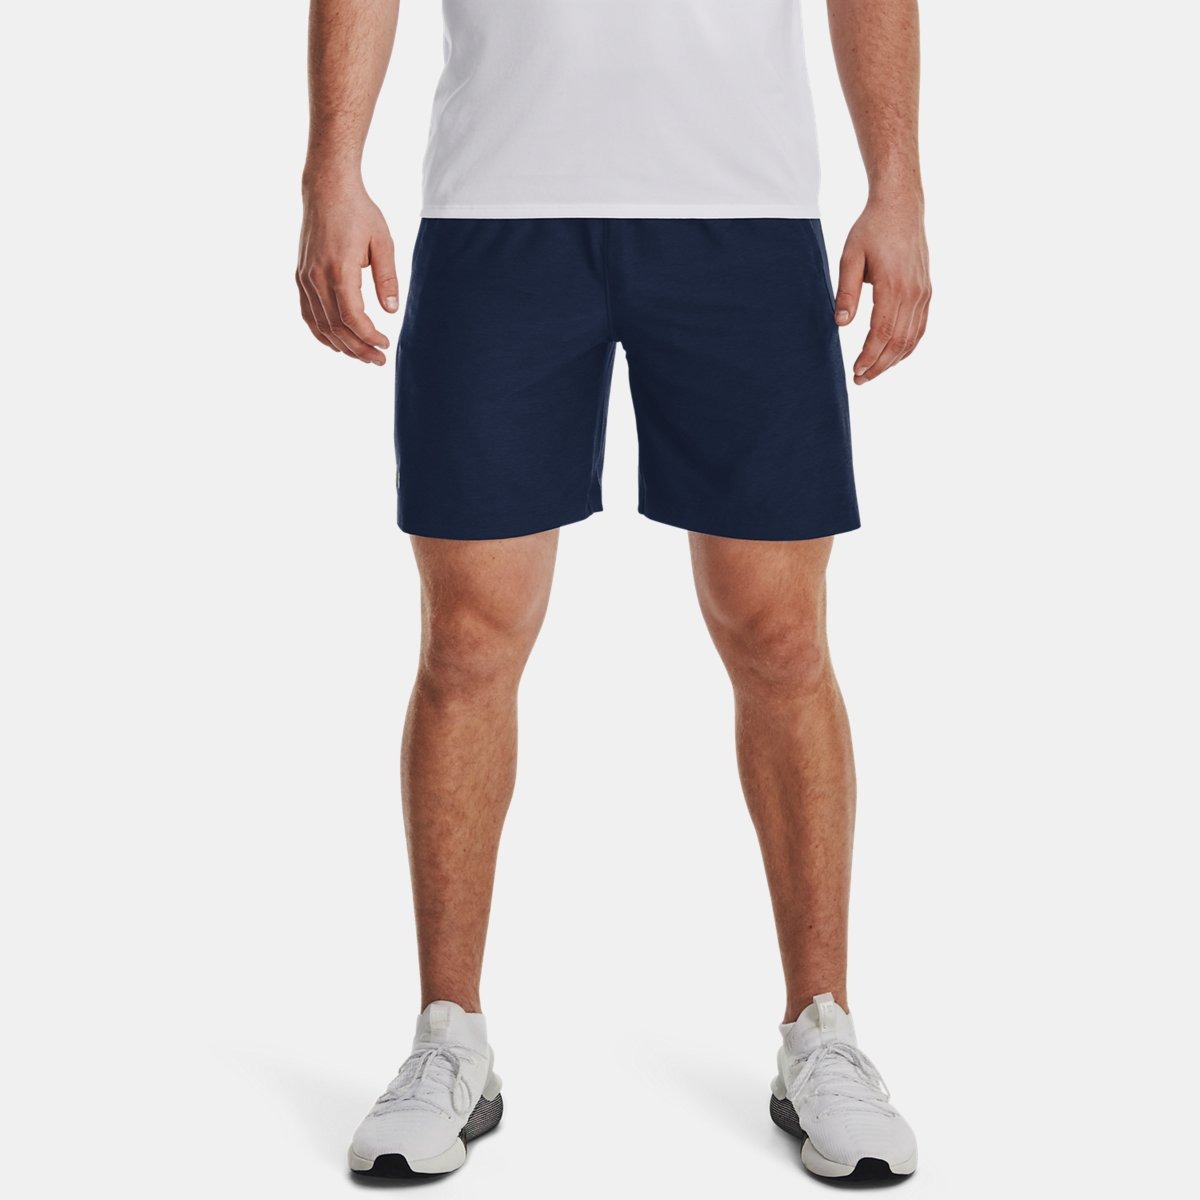 Gents Blue Shorts at Under Armour GOOFASH